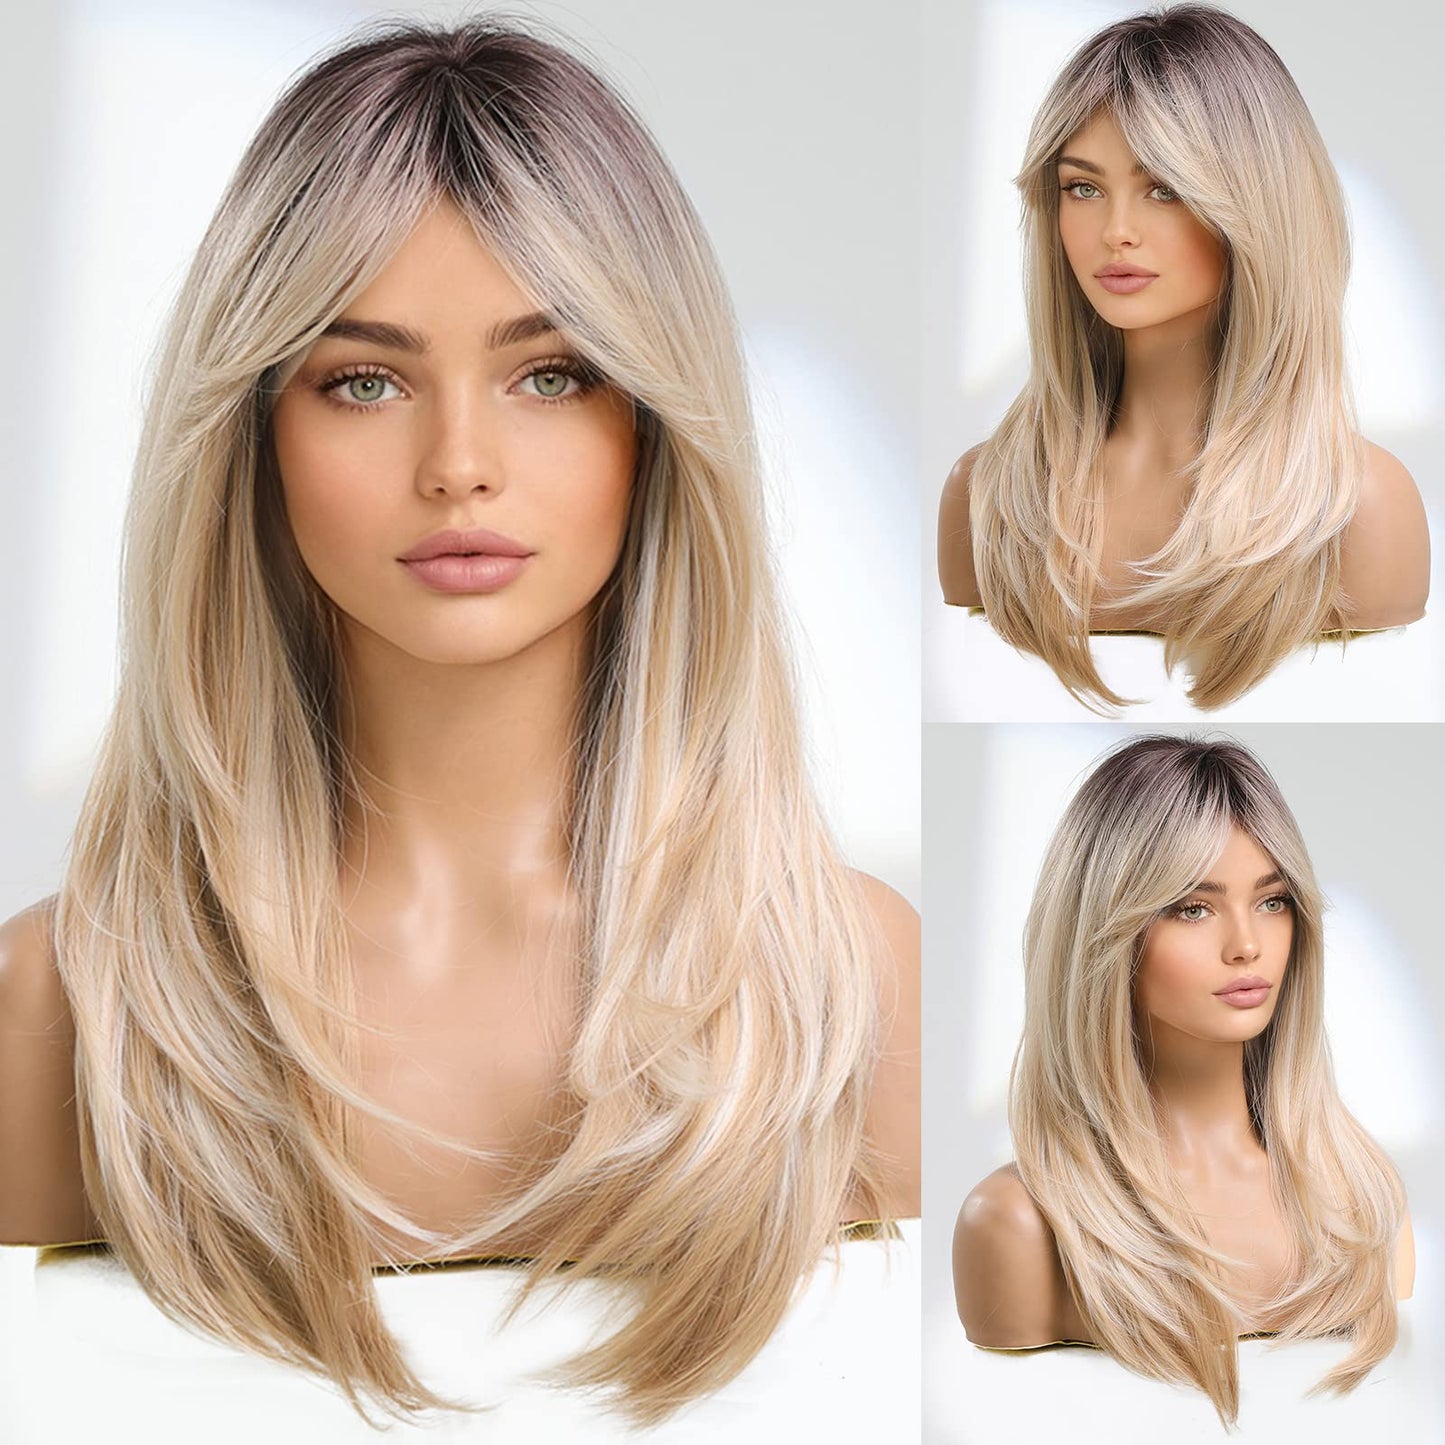 YHRY Blonde Wigs for Women, Long Blonde Wig with Bangs, Heat Resistant Natural Looking Wigs, Middle Part Blonde Wigs with Dark Roots, Layered Synthetic Hair Wig for Daily Party Use Cosplay(55 cm)